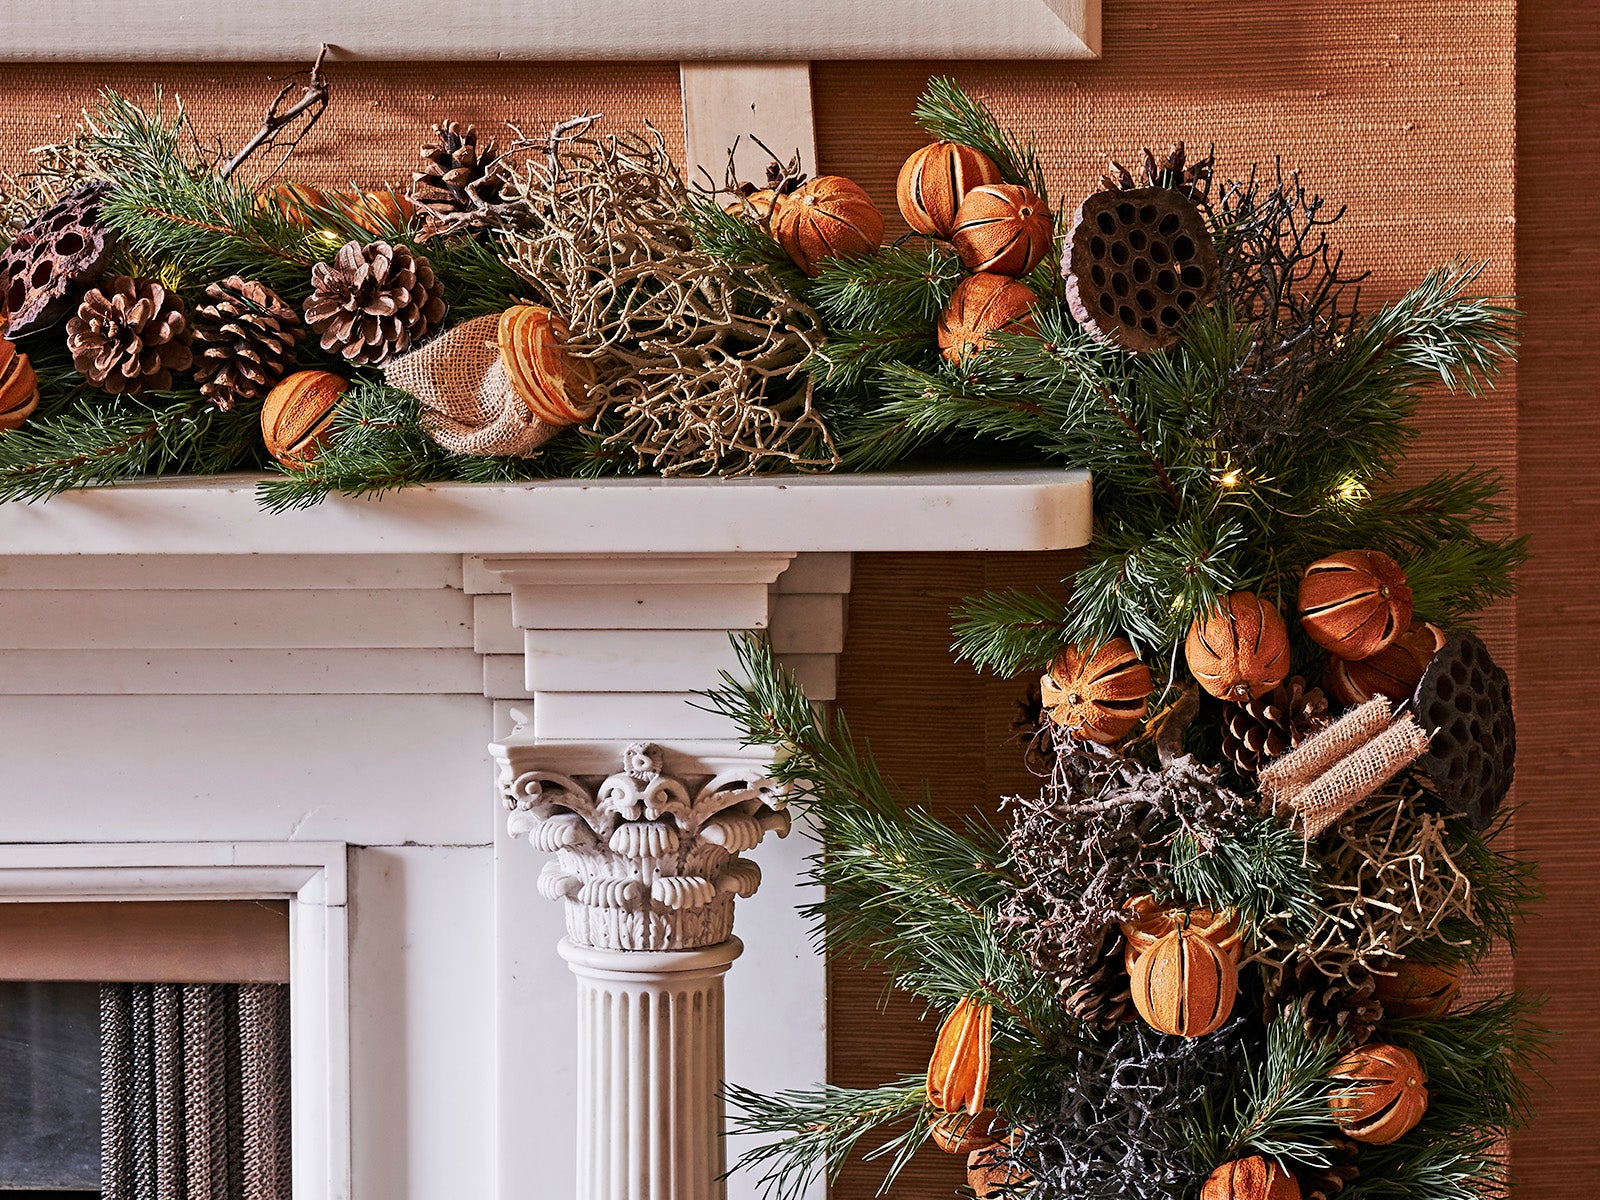 Fireplace Christmas garland with pinecones and dried citrus fruit